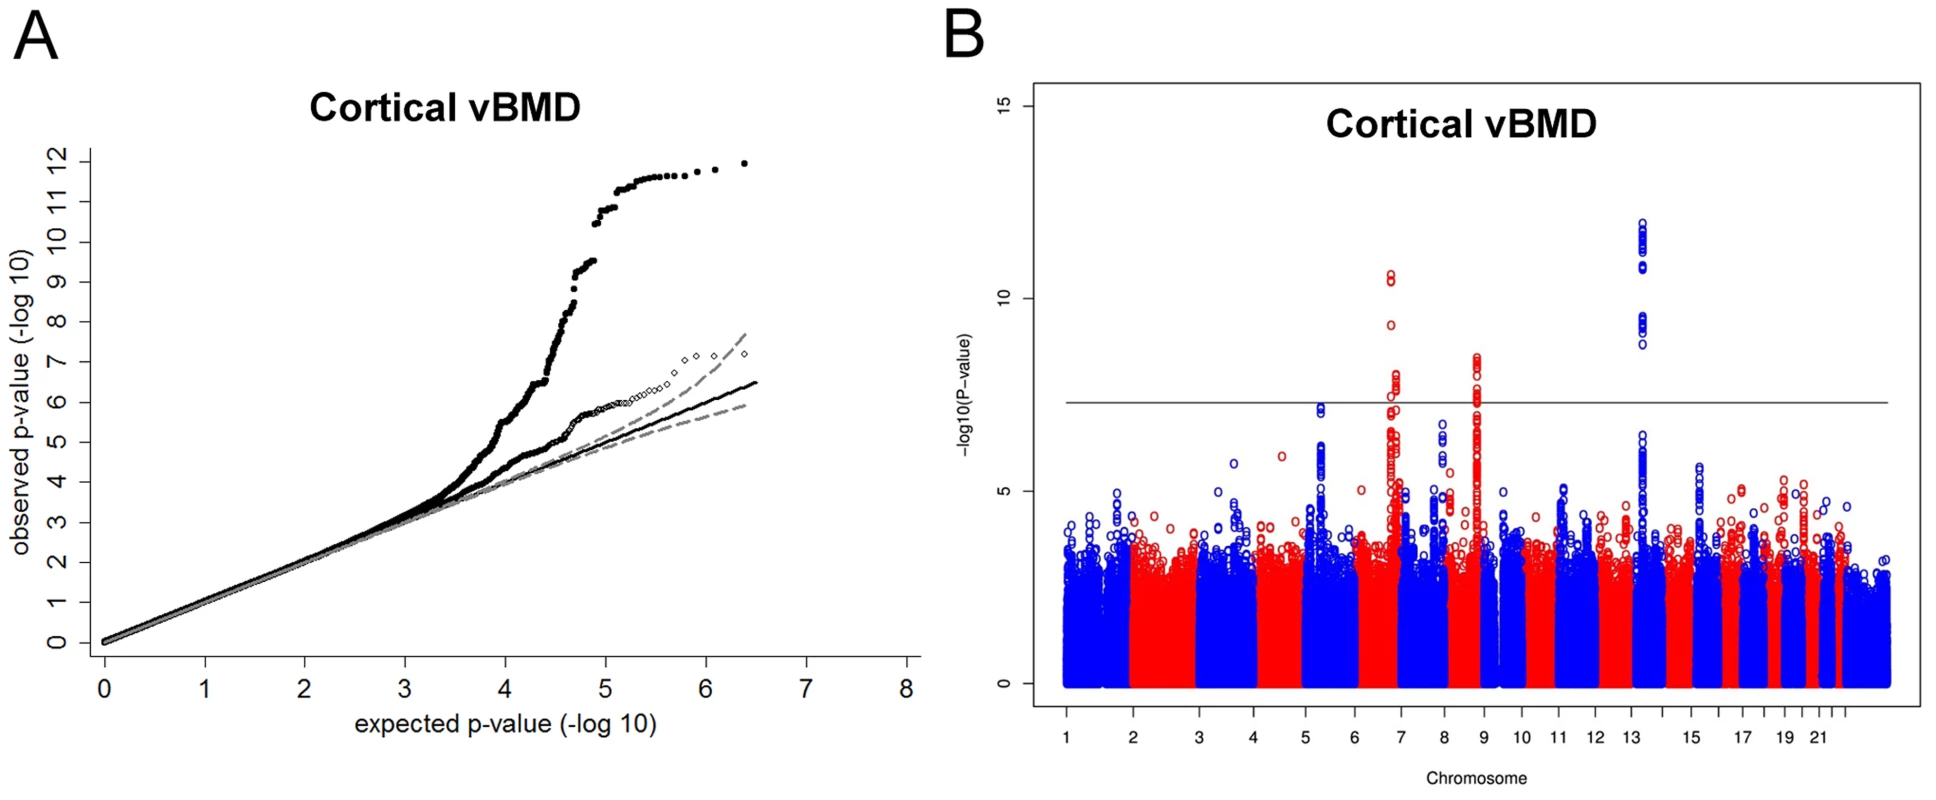 Genome-wide meta-analysis of cortical vBMD.